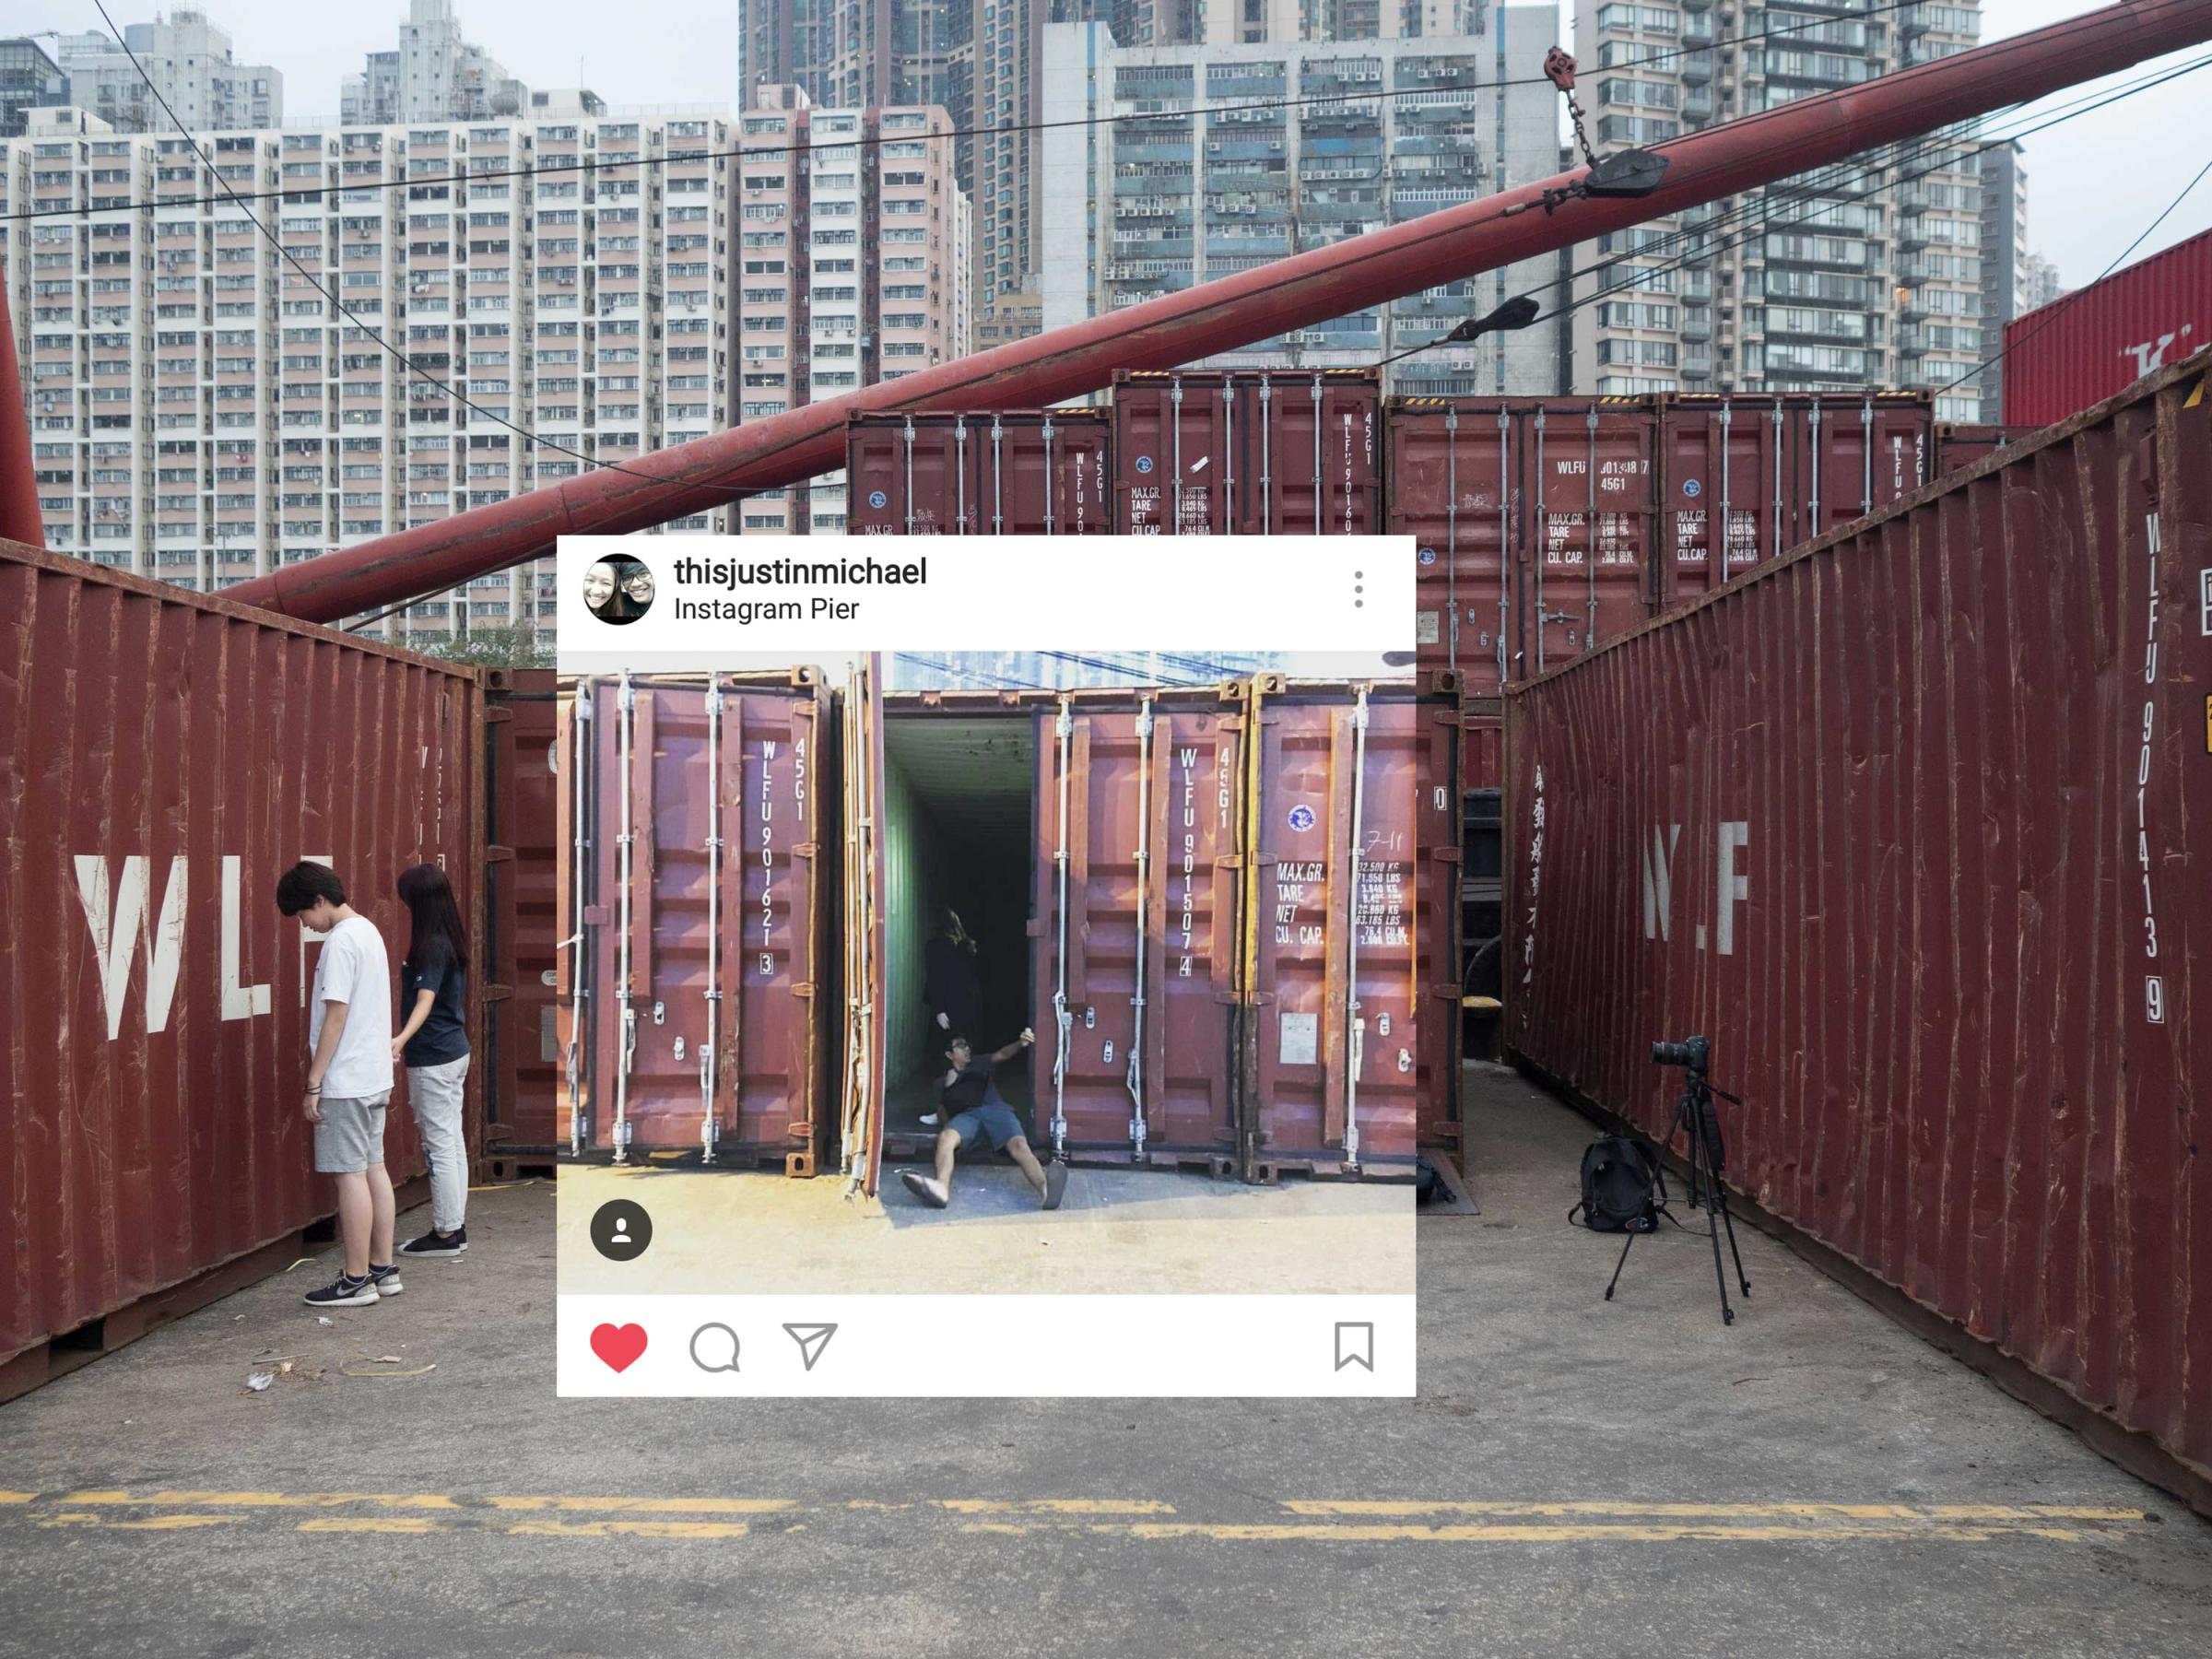 Hong Kong (Hong Kong SAR, China); Date (10, 30, 2016); two youngsters make selfies on the Pier. "Instagram pier" is a public cargo pier located on the west side of Hong Kong island; here locals gather for fishing, excercising or walking their pets. More recently the Pier has raised to fame as the “instagram Pier”, whereyoung Hong Kongers and instagrammers come for selfies and scenic photos. I have recently begun curating its "instagram" dedicated account (@insta_pier).